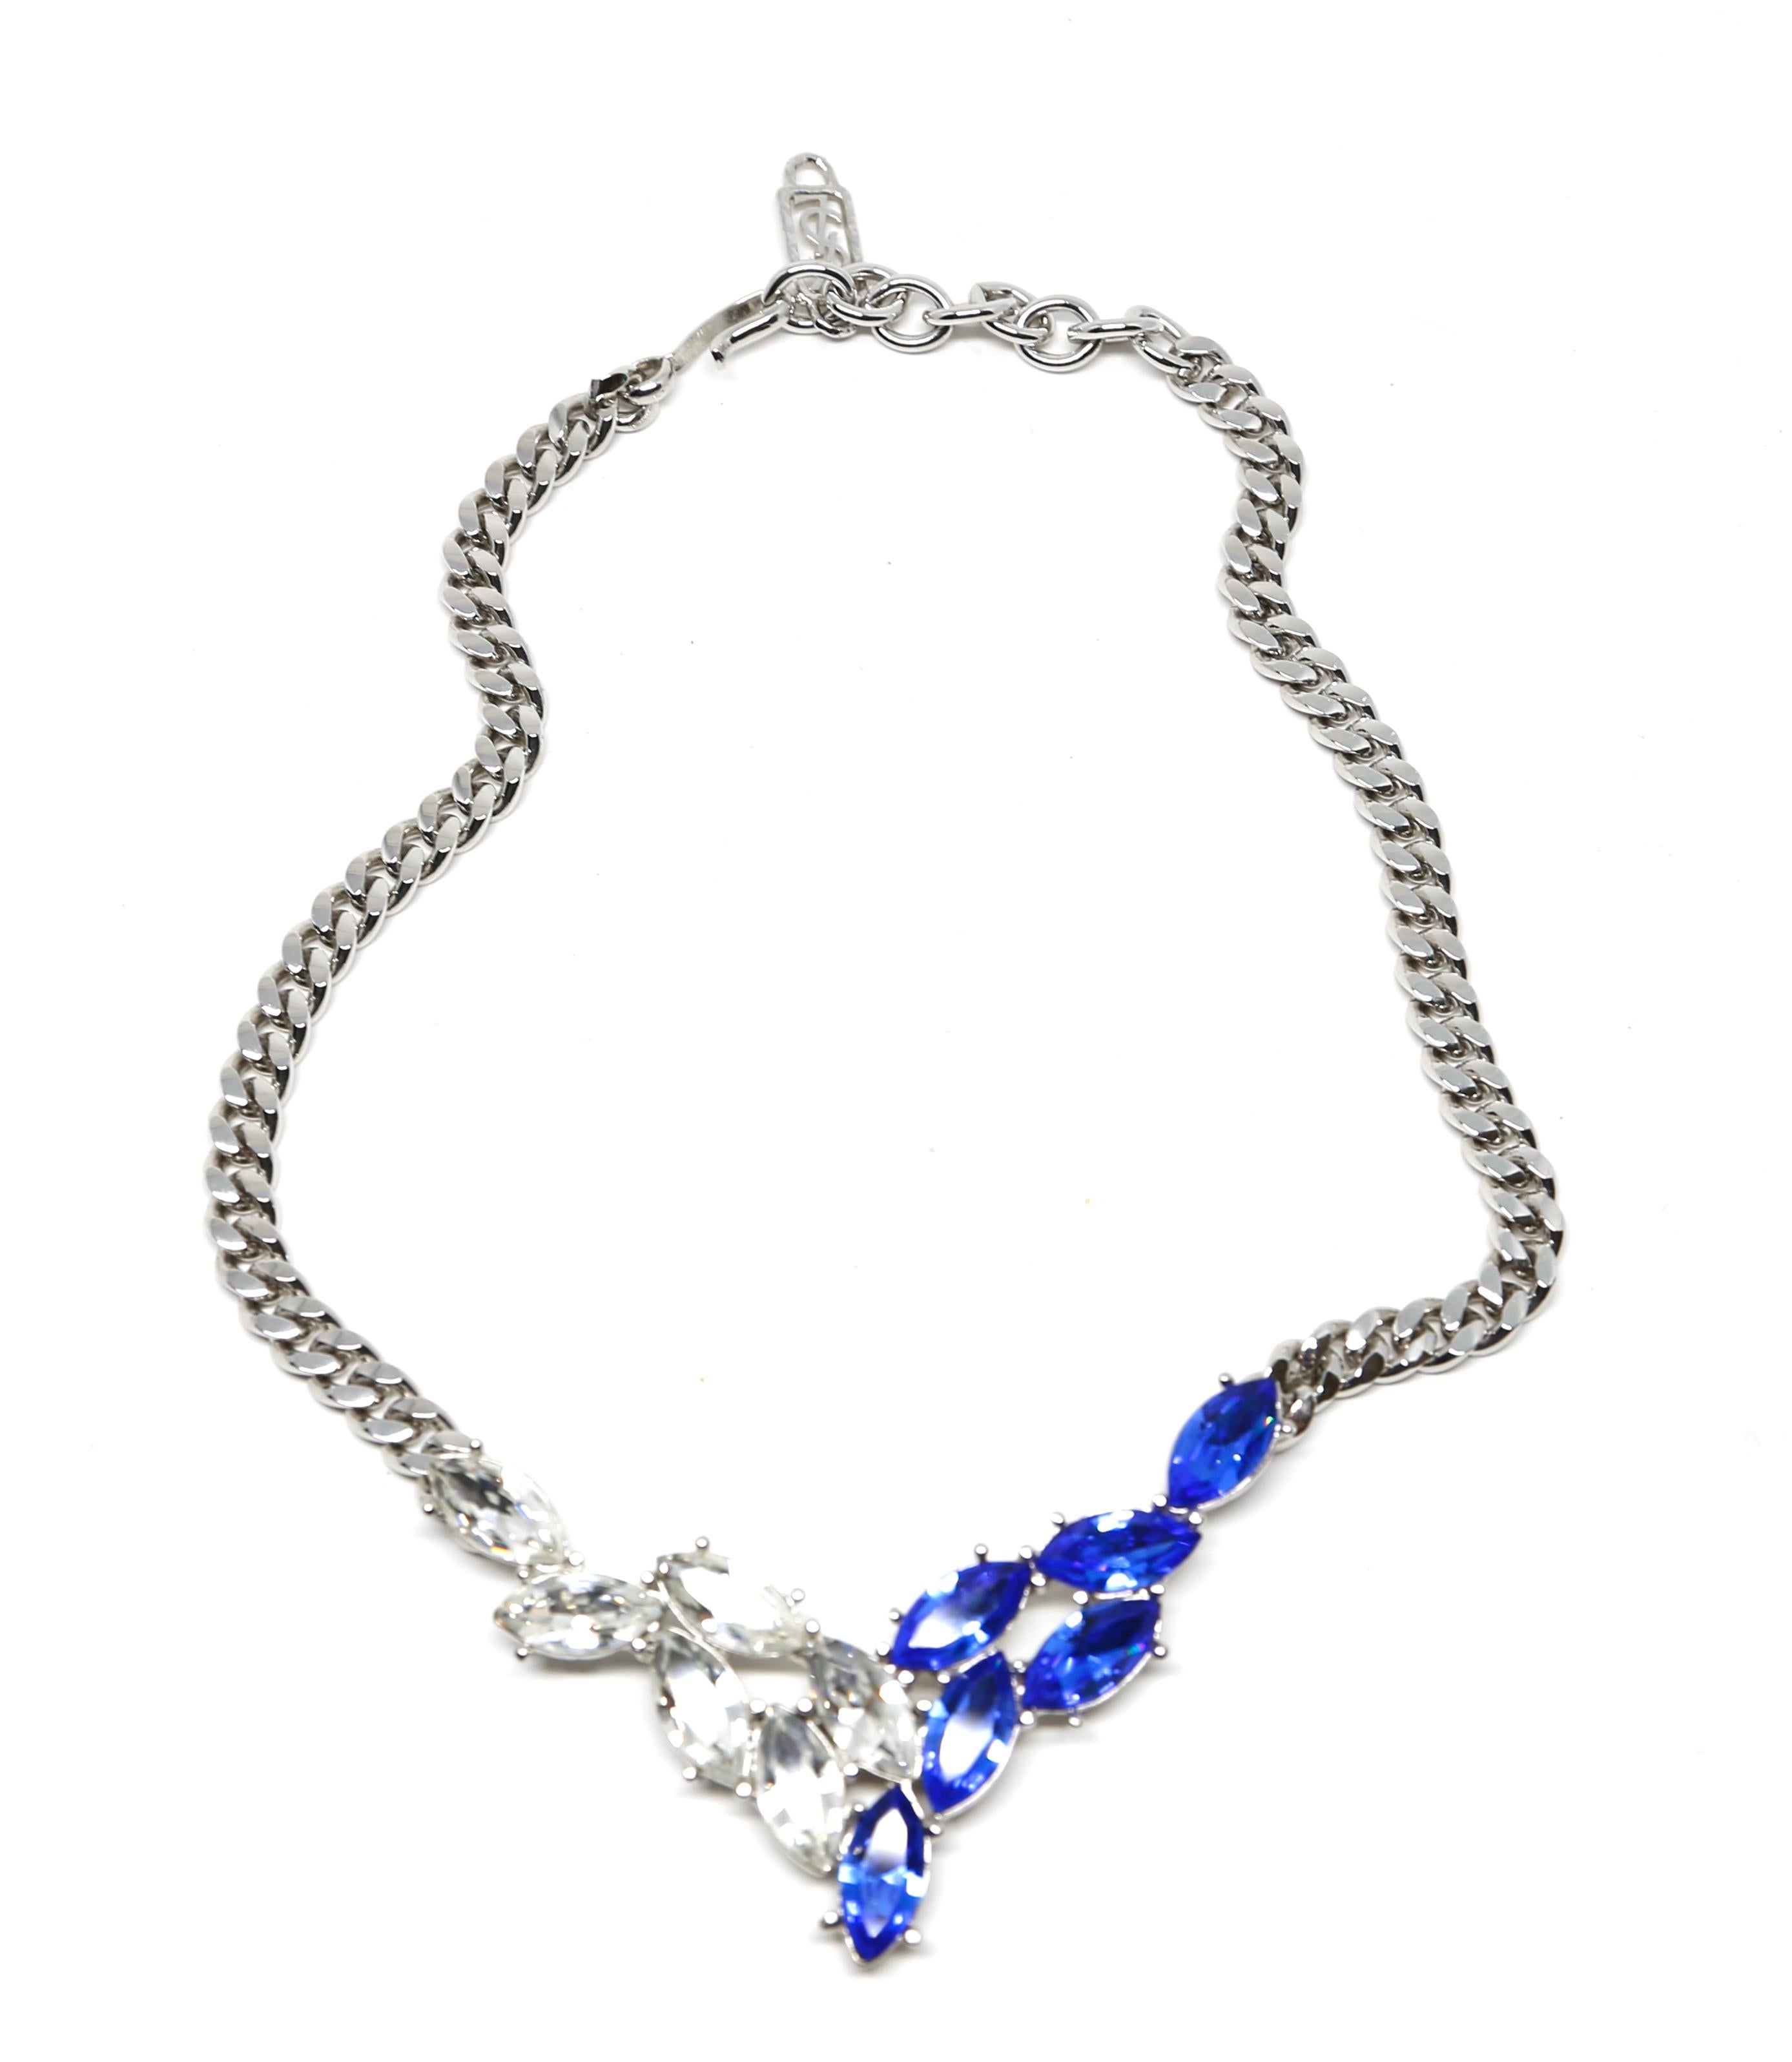 Striking, blue and clear faceted crystal necklace set in silver-tone metal designed by Yves Saint Laurent dating to the 1990's. Measures approximately: 18